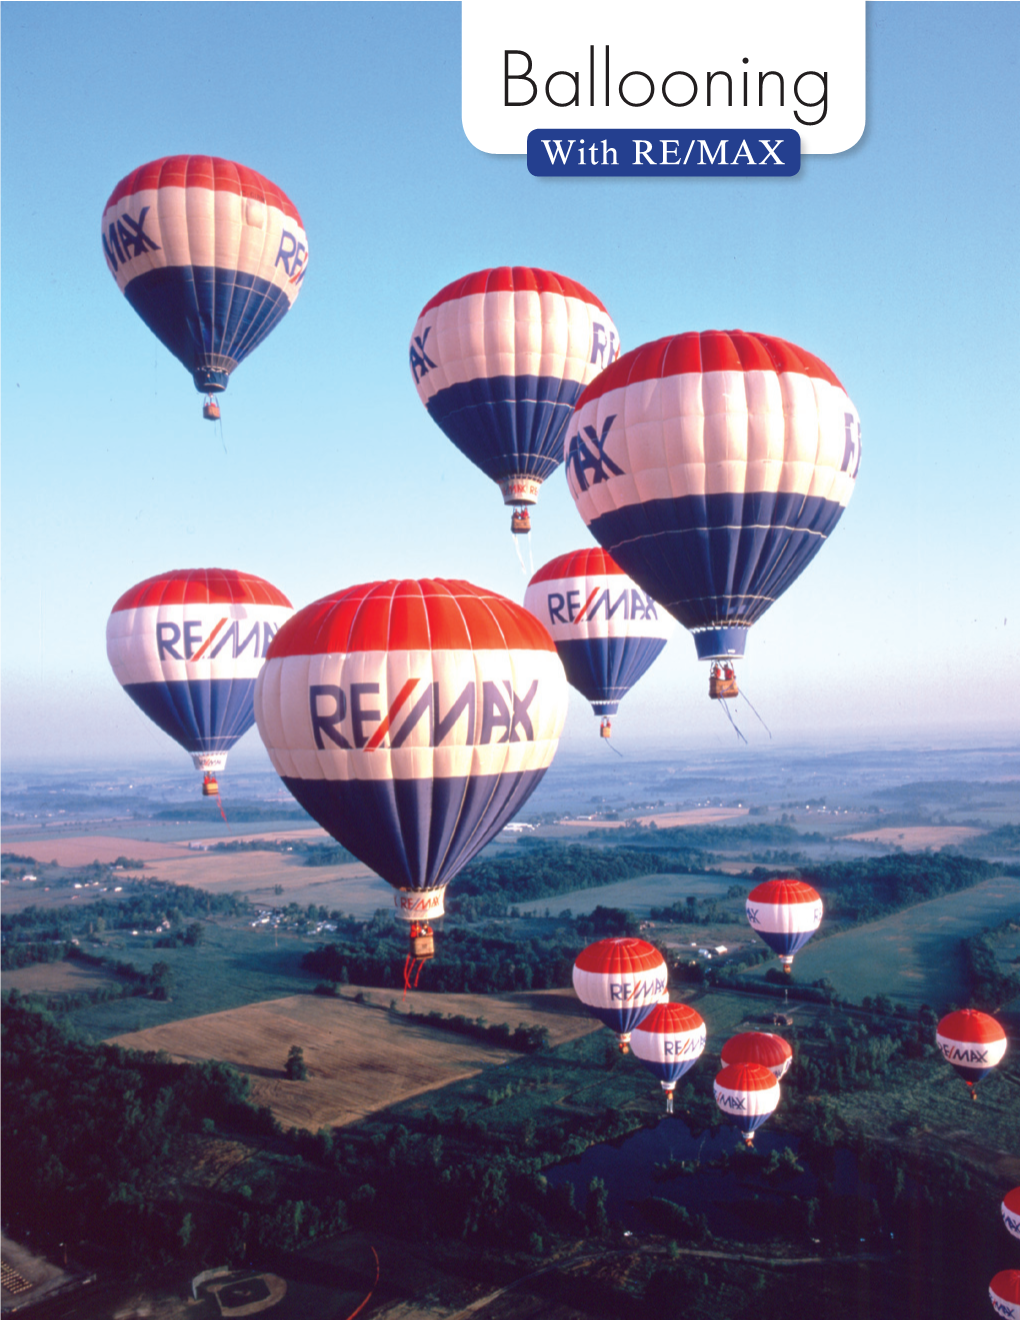 Ballooning with RE/MAX